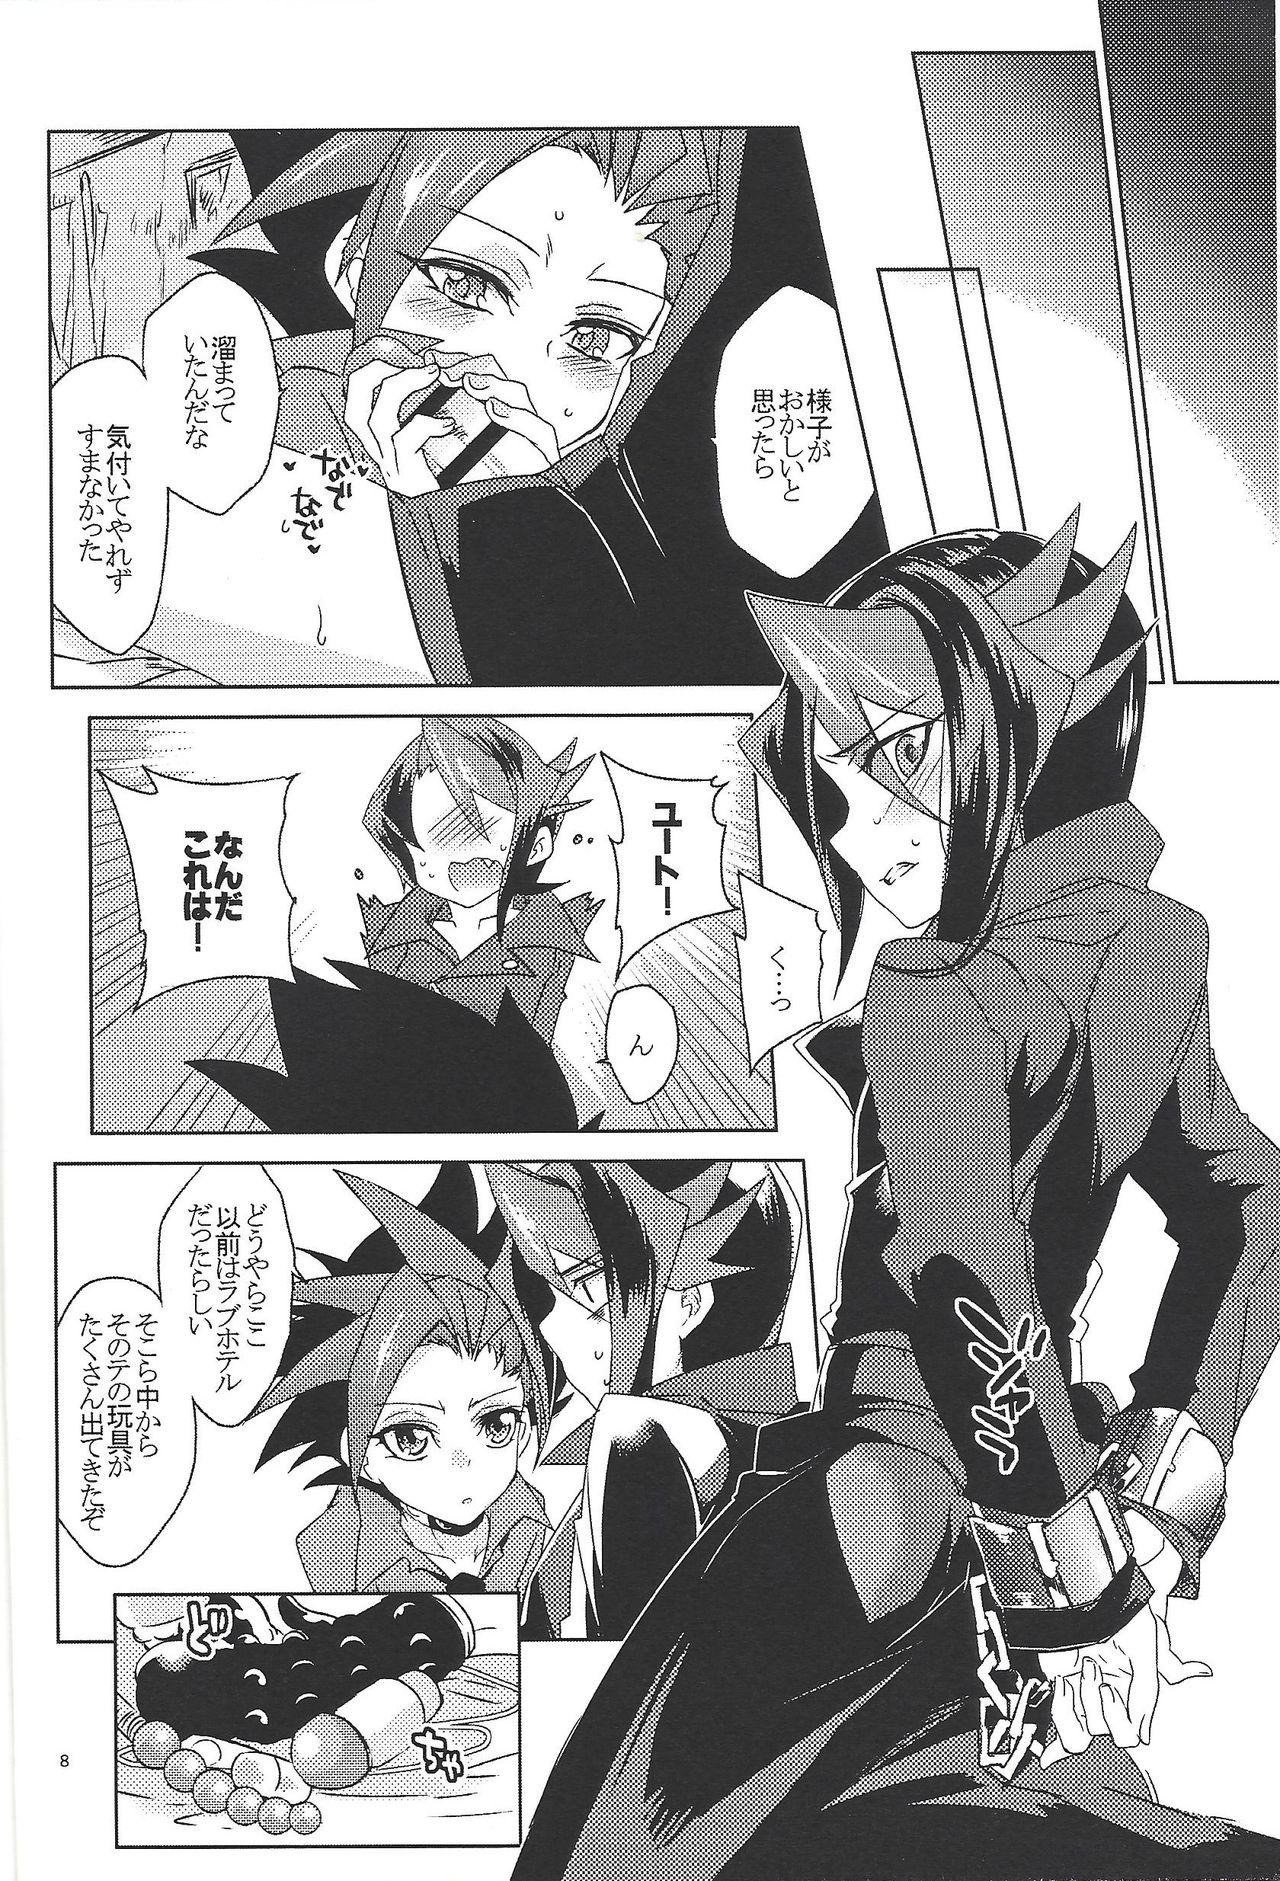 From SEX CHALLENGERS 02 - Yu-gi-oh arc-v Stunning - Page 7